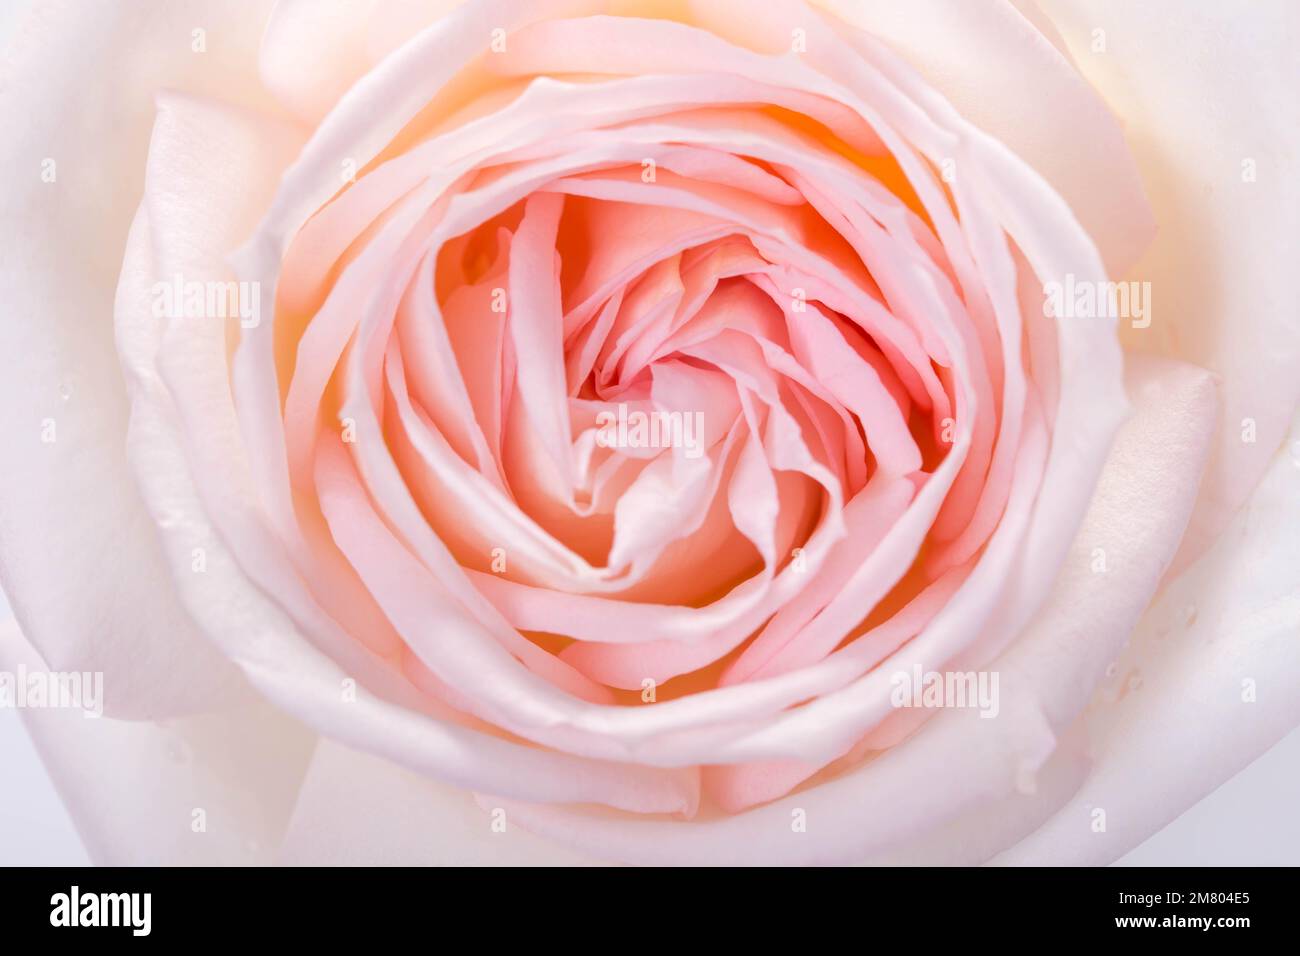 Beautiful aromatic fresh blossoming tender pink rose texture, close up view. Romantic background Stock Photo